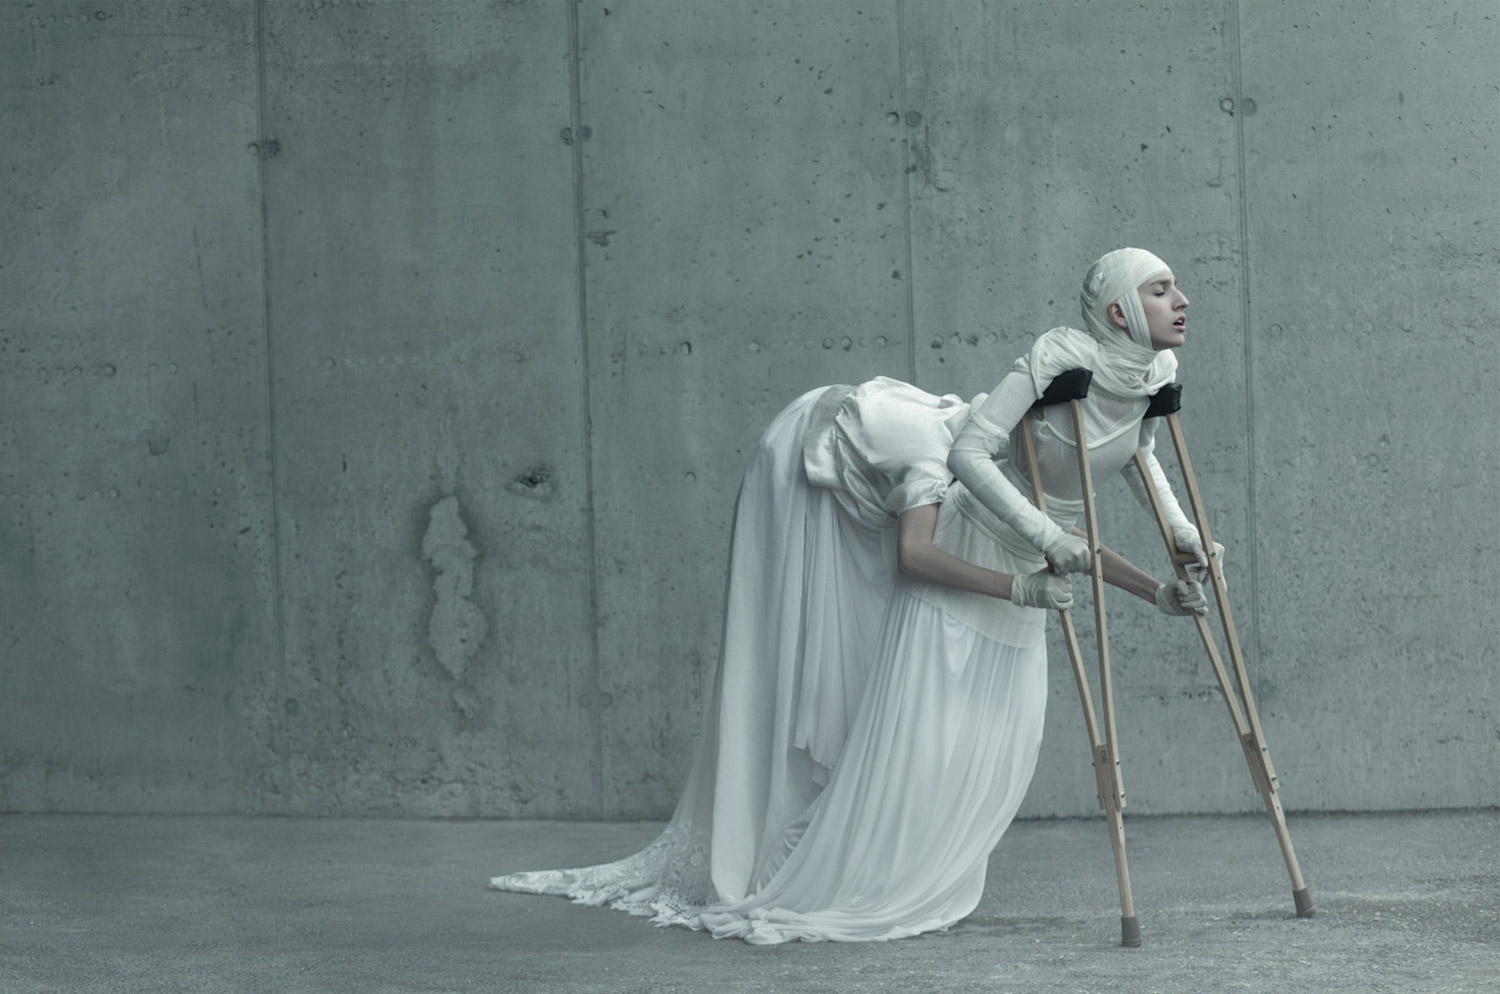 Evelyn Bencicova, Black and White Magic, surreal photo of multi-armed woman on crutches.